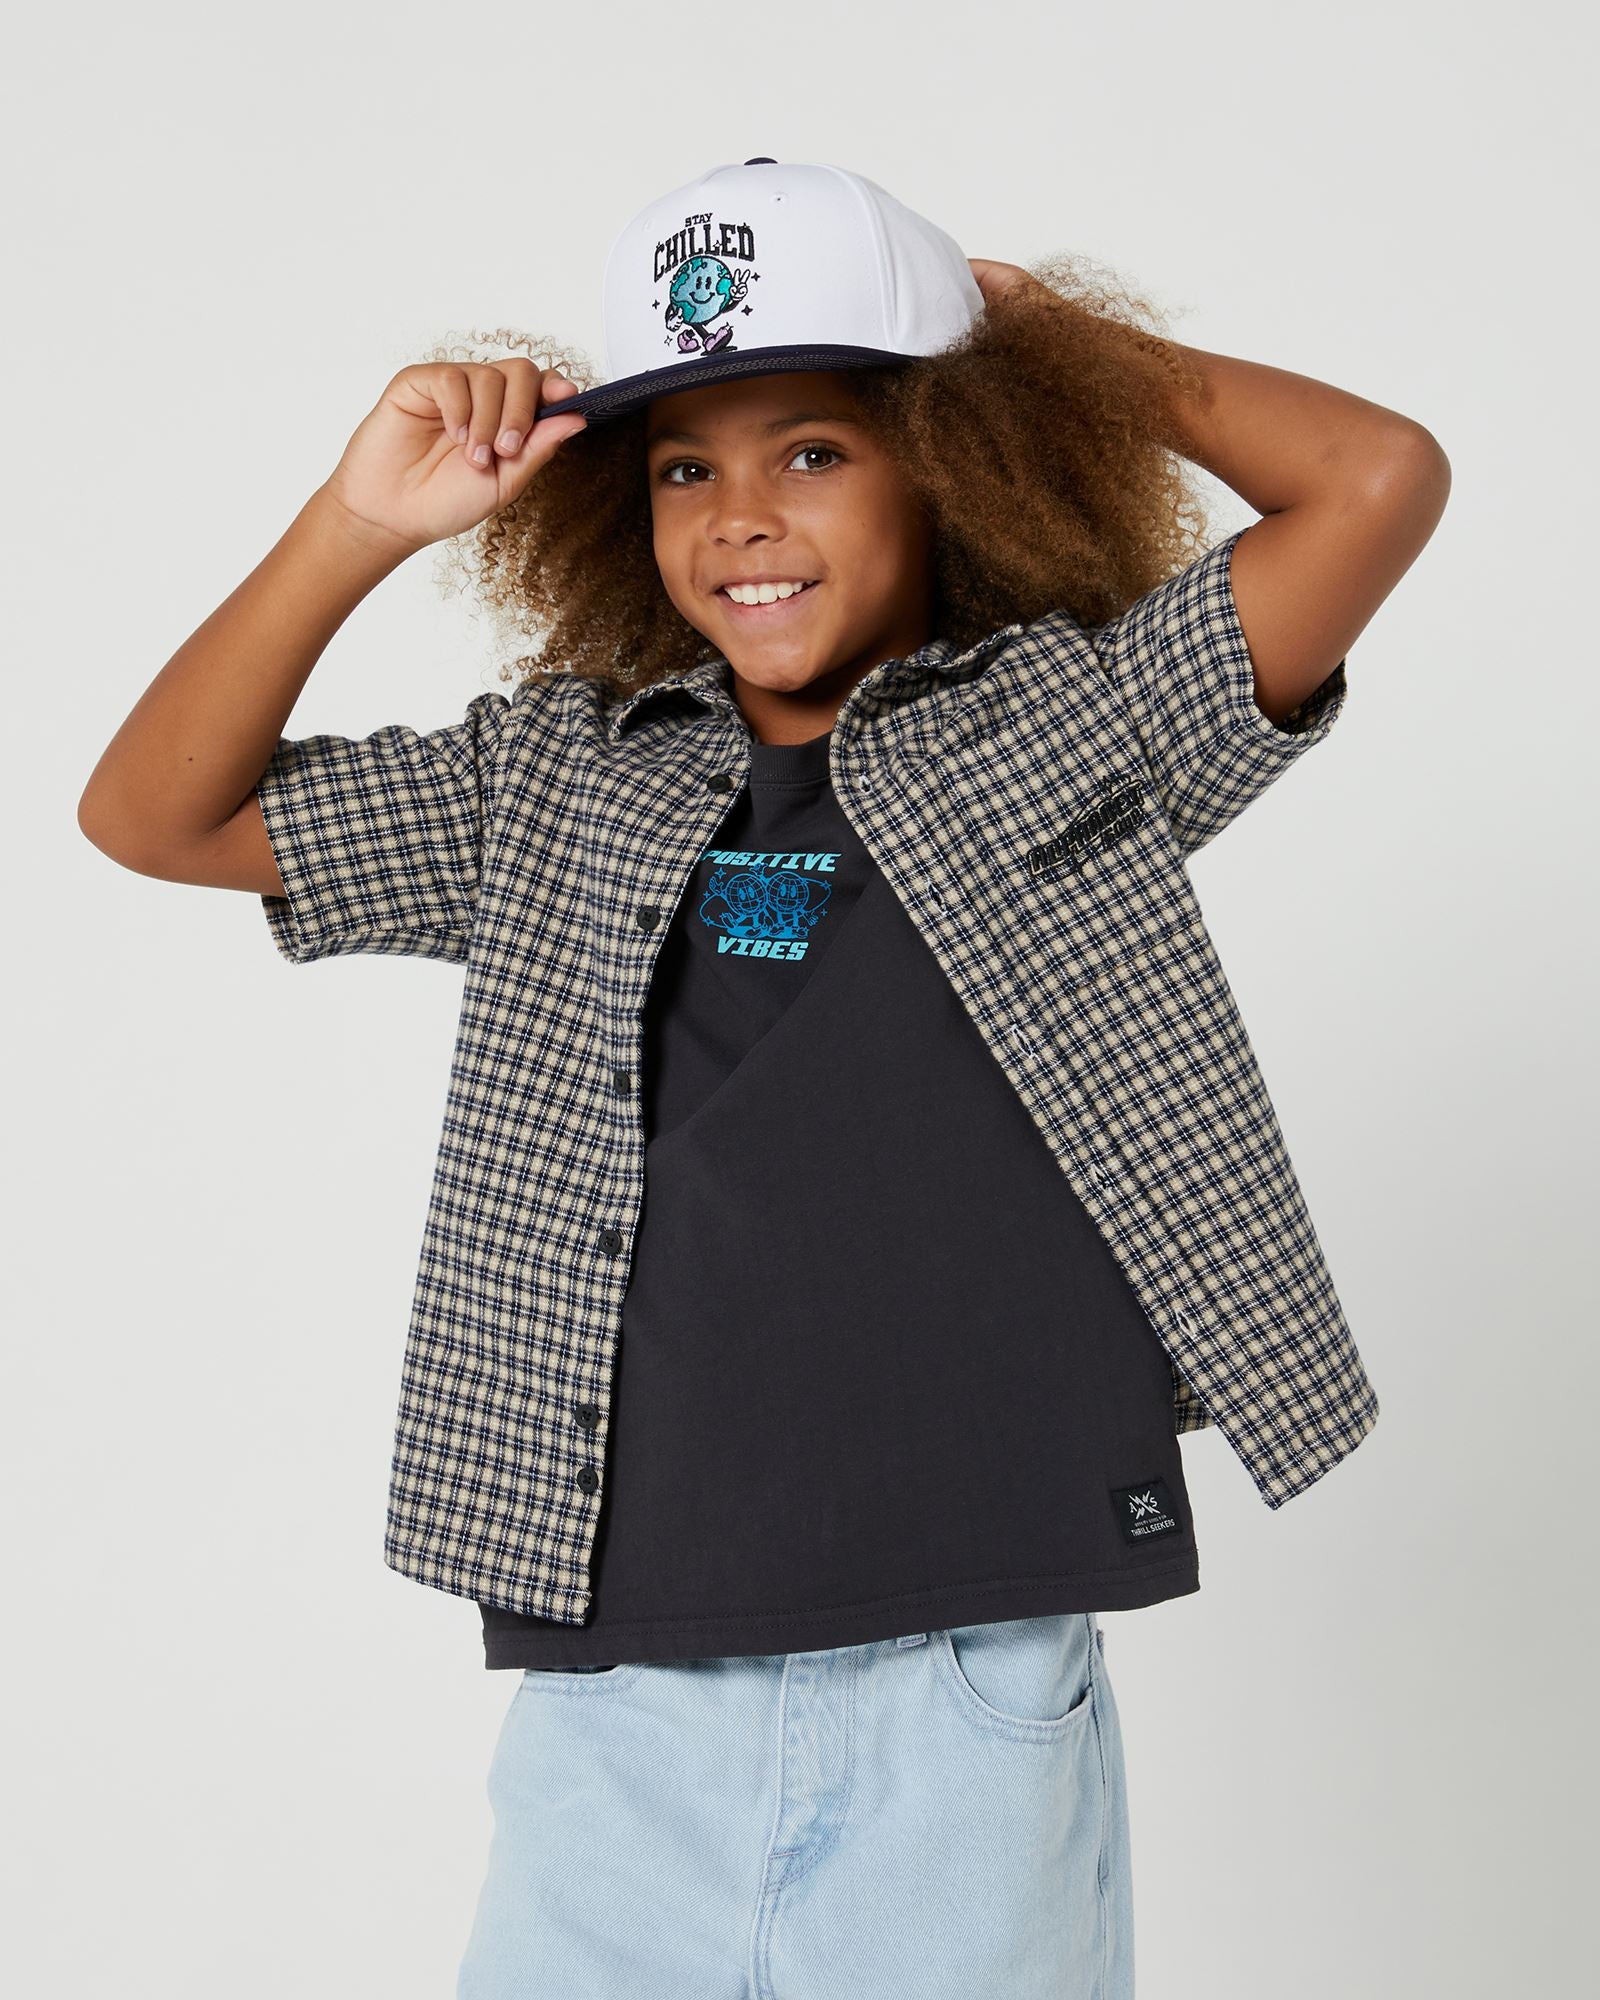 Boys Alphabet Soup's Kids Check It Short Sleeve Shirt is made from 100% cotton and features a curved hemline, button through placket, and open chest pocket. Ideal for any drop-in, with yarn check fabric and embroidered art.